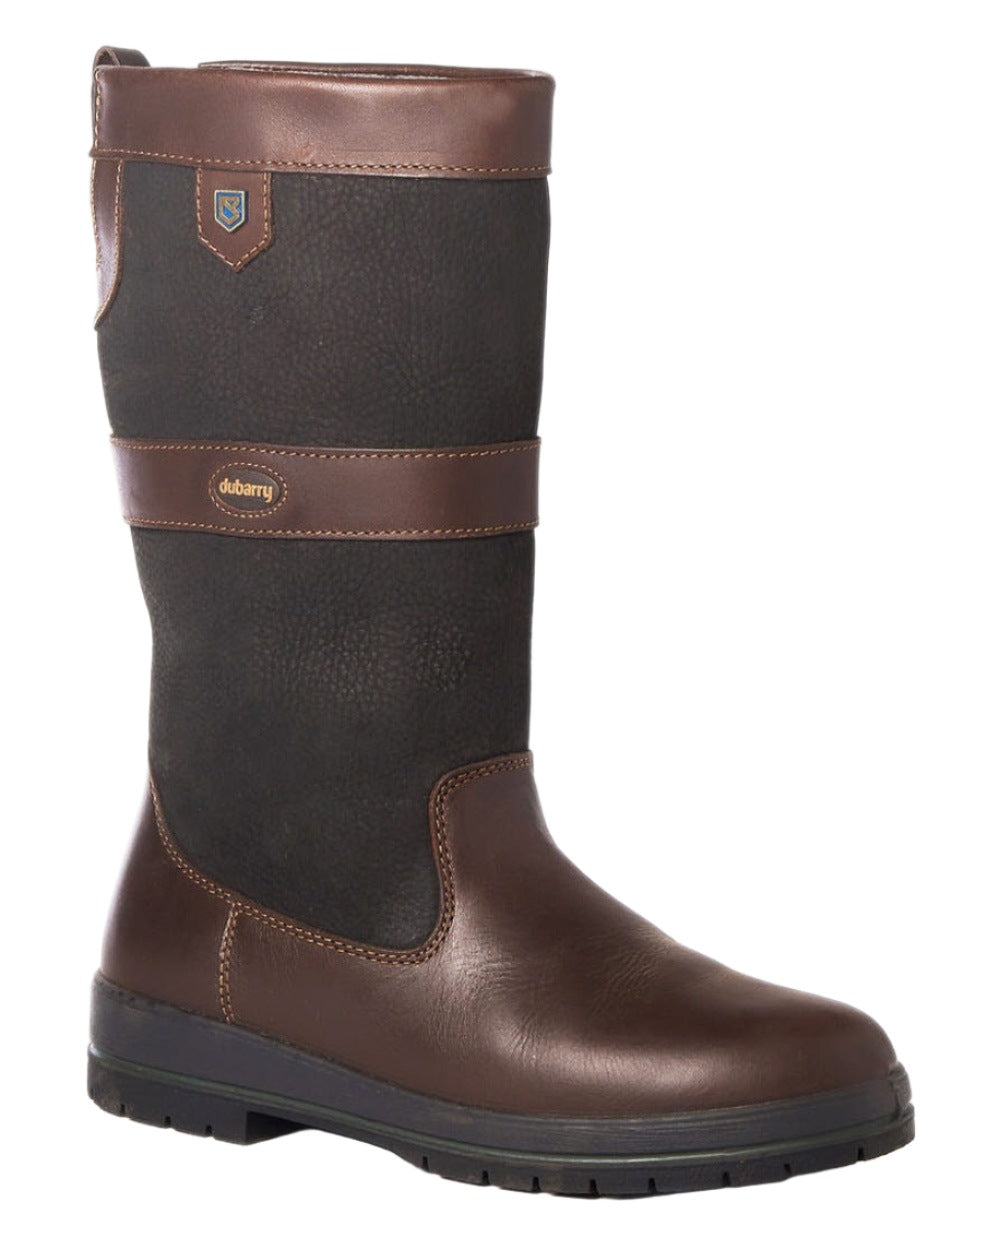 Black/Brown coloured Dubarry Kildare Country Boots on white background 